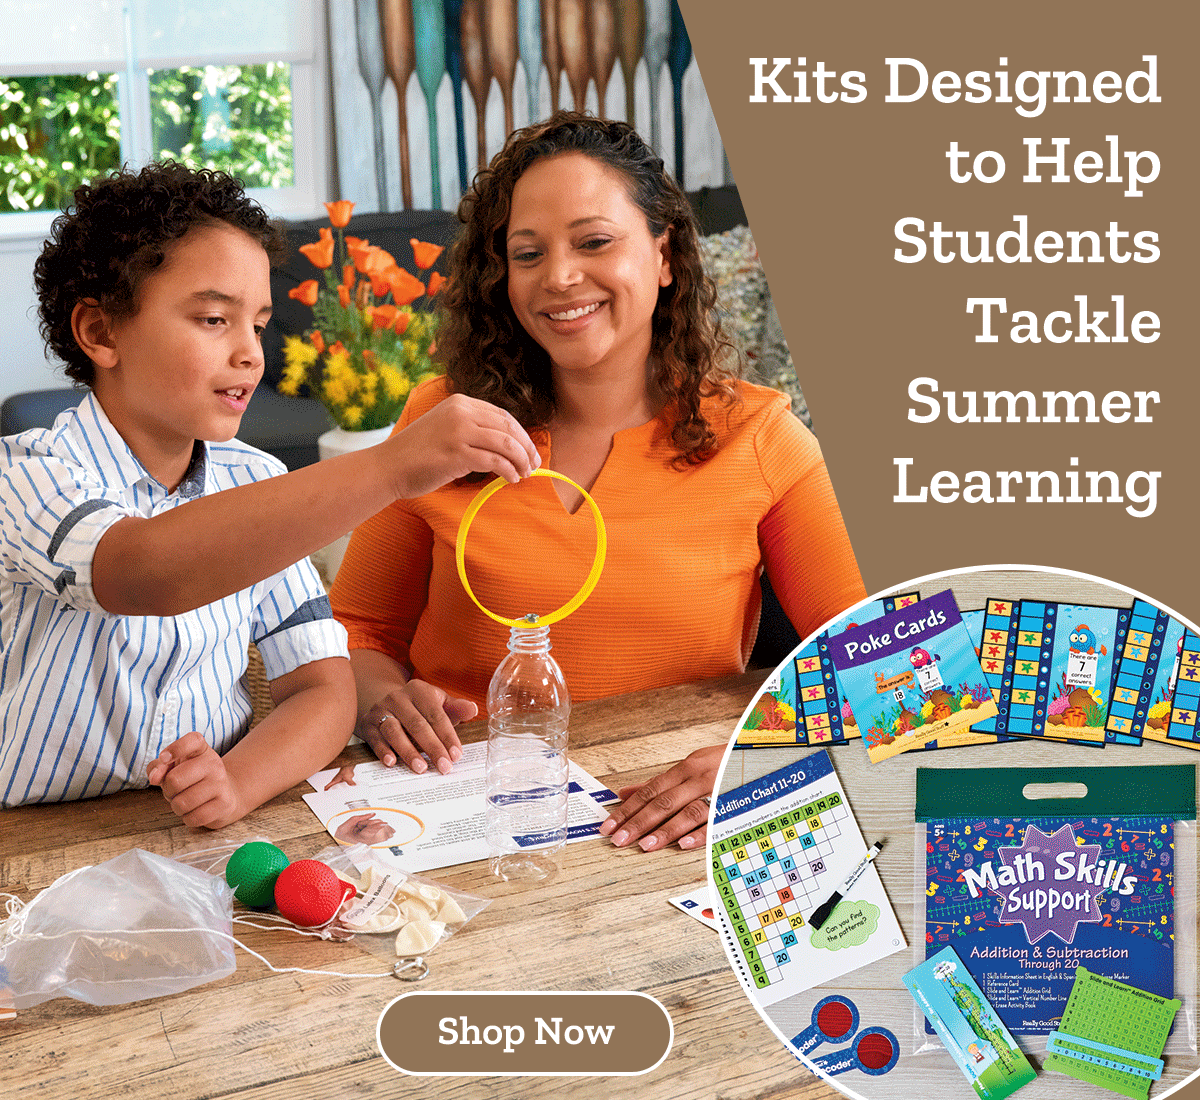 Kits designed to help students tackle summer learning